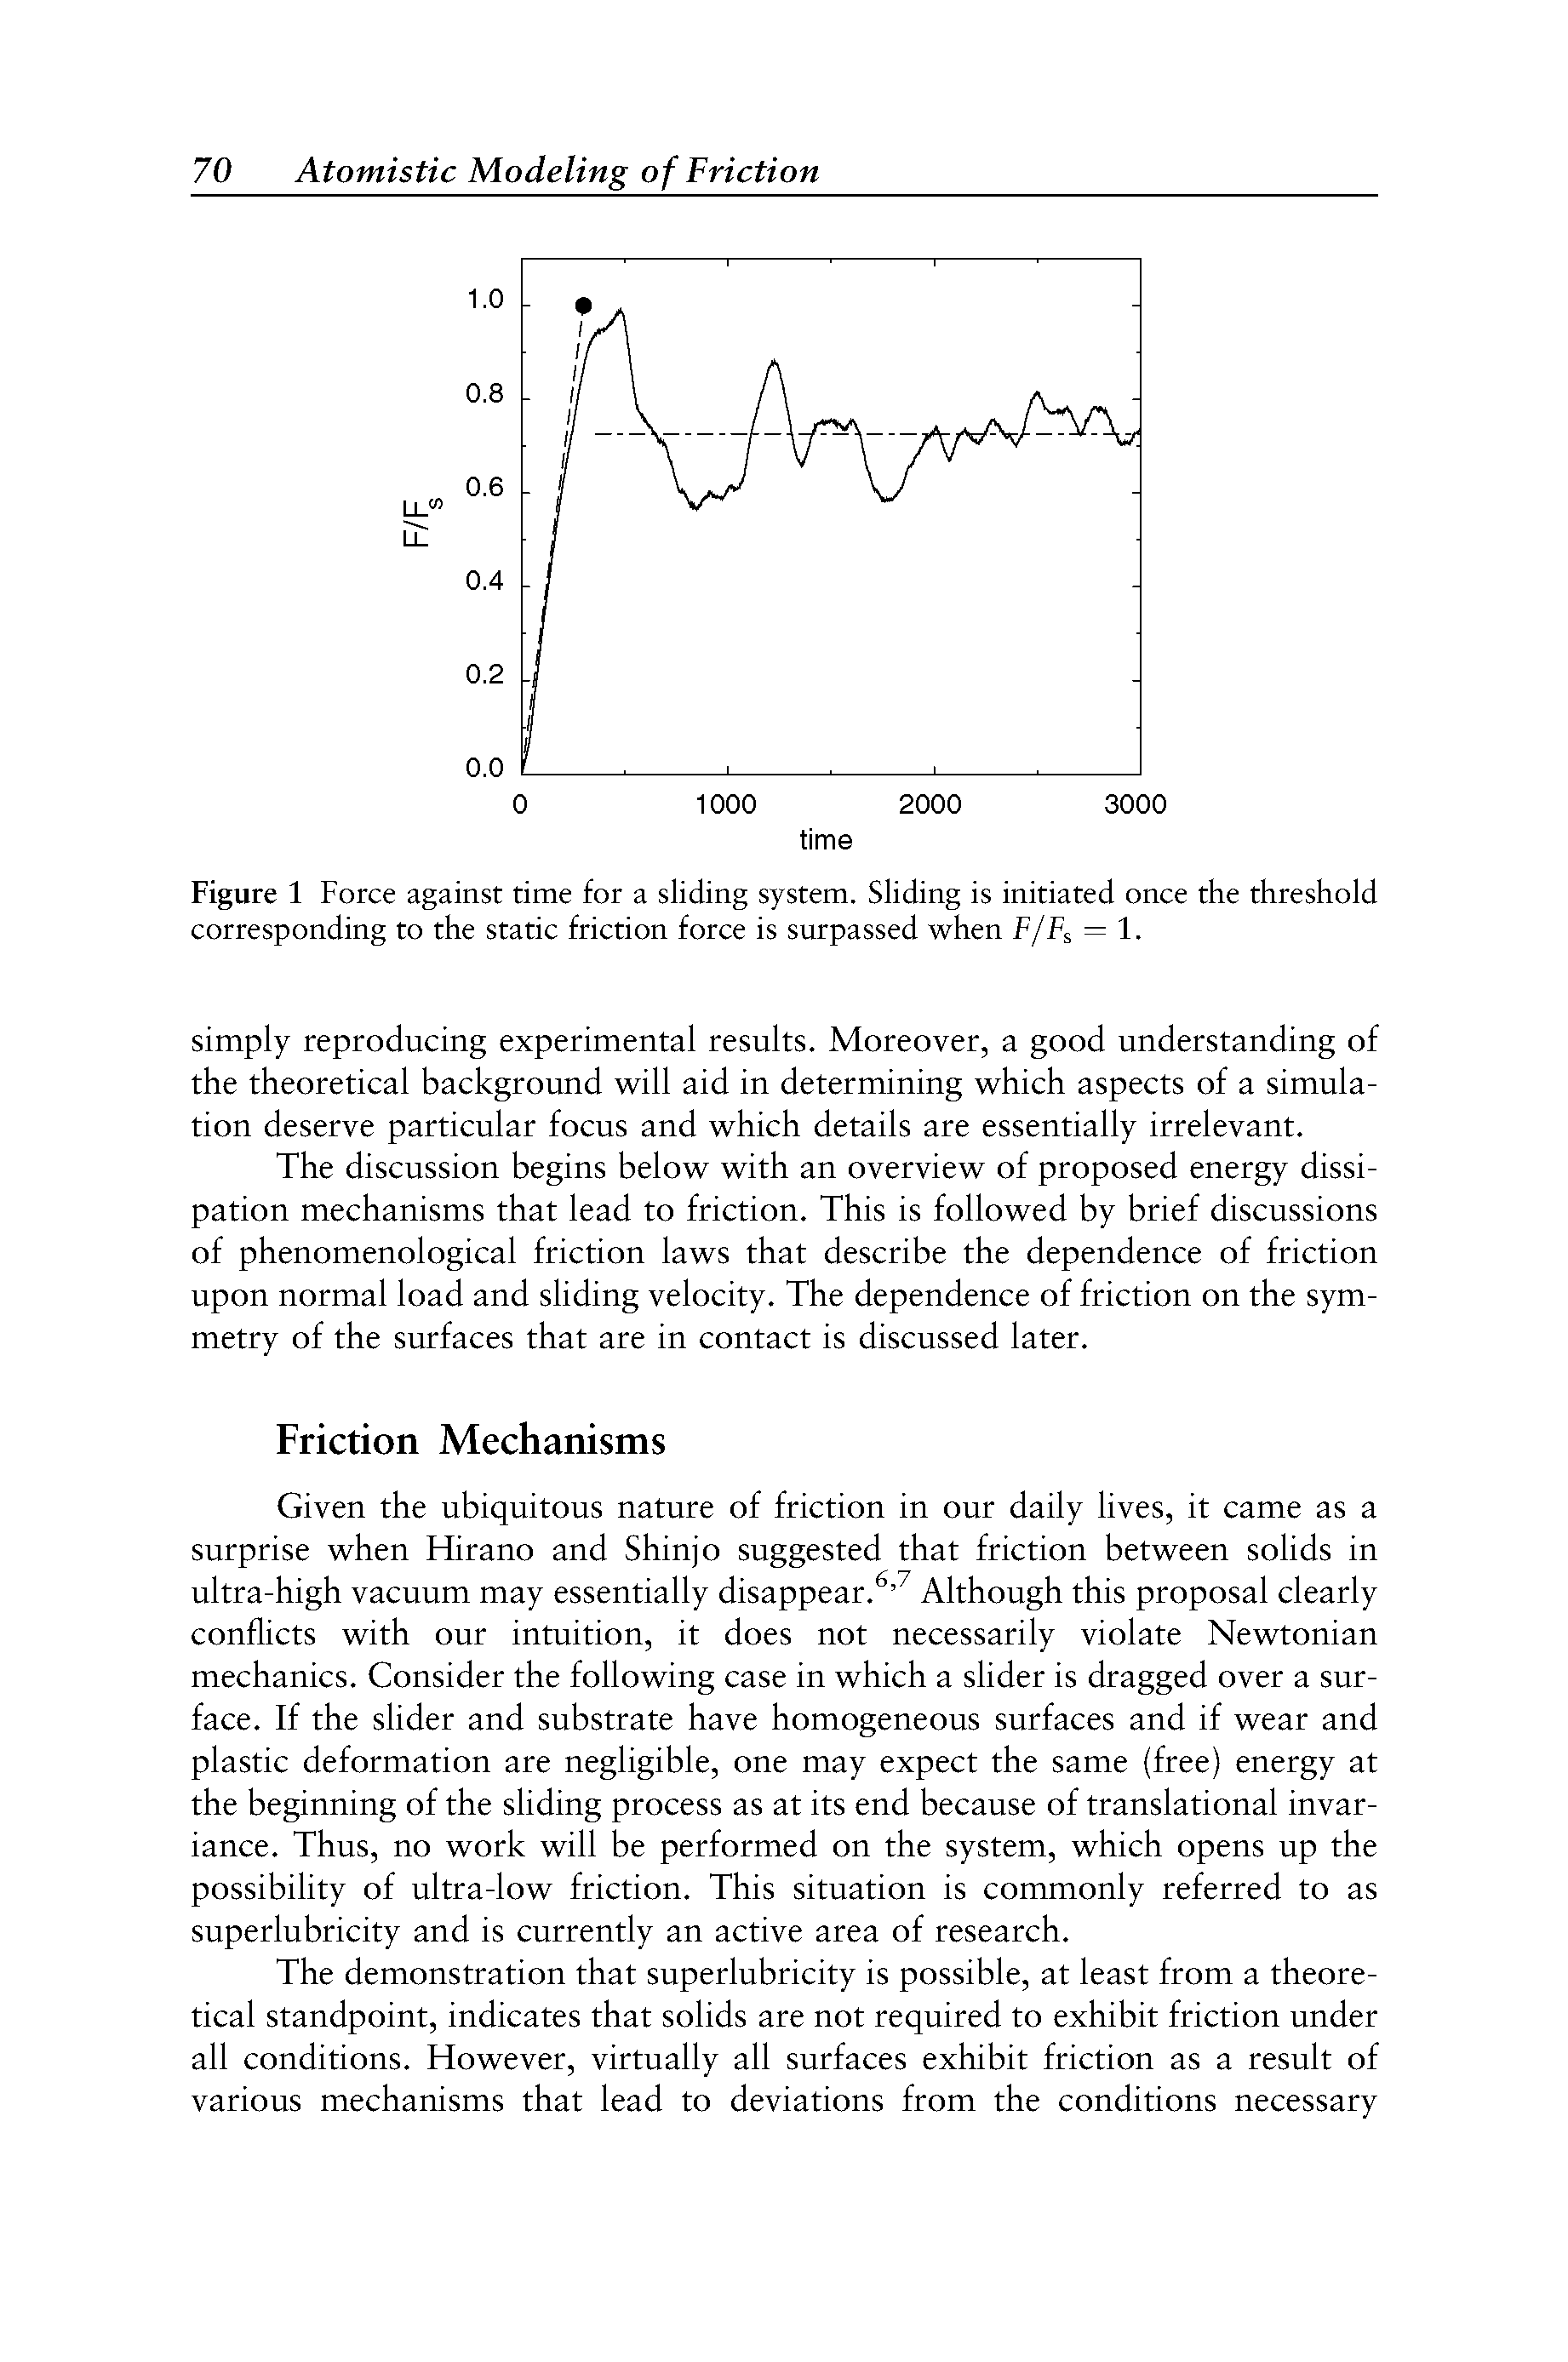 Figure 1 Force against time for a sliding system. Sliding is initiated once the threshold corresponding to the static friction force is surpassed when F/Fs = 1.